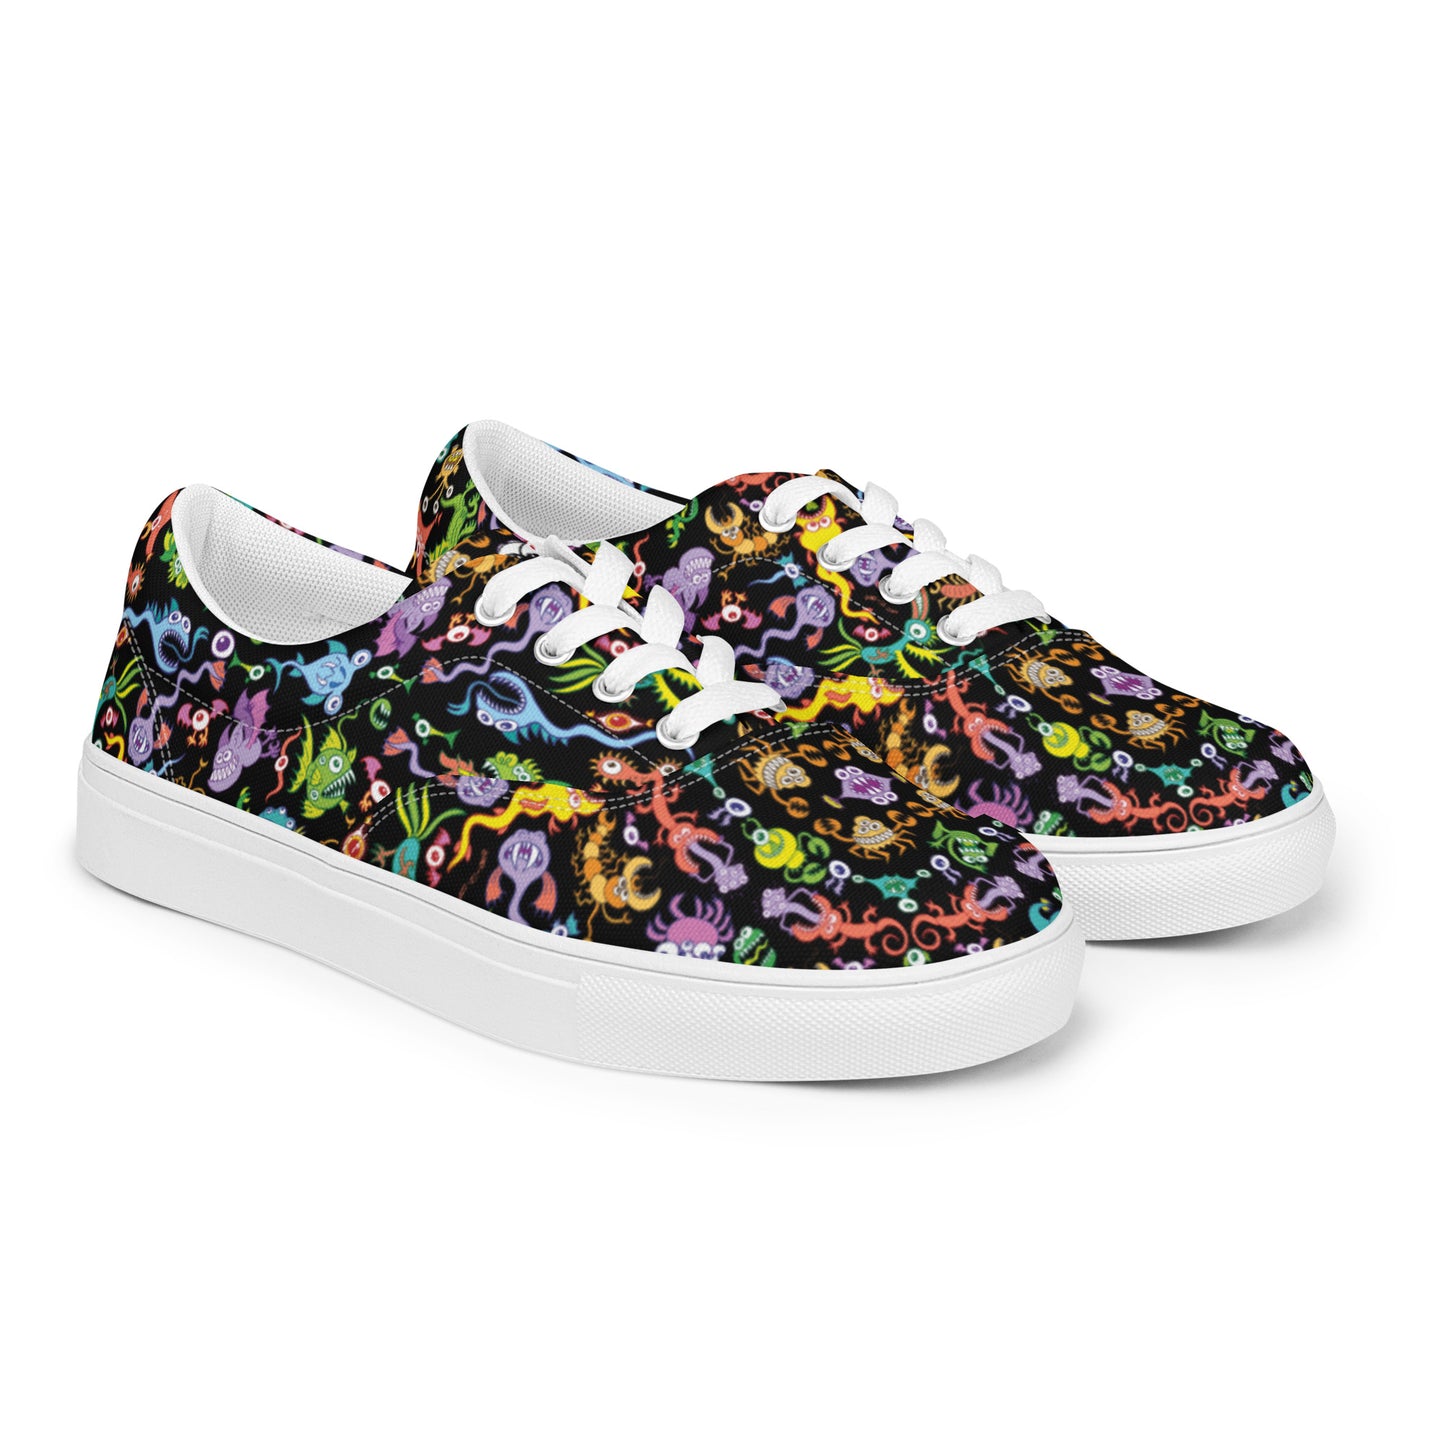 Ocean critters mandala pattern Women’s lace-up canvas shoes. Overview